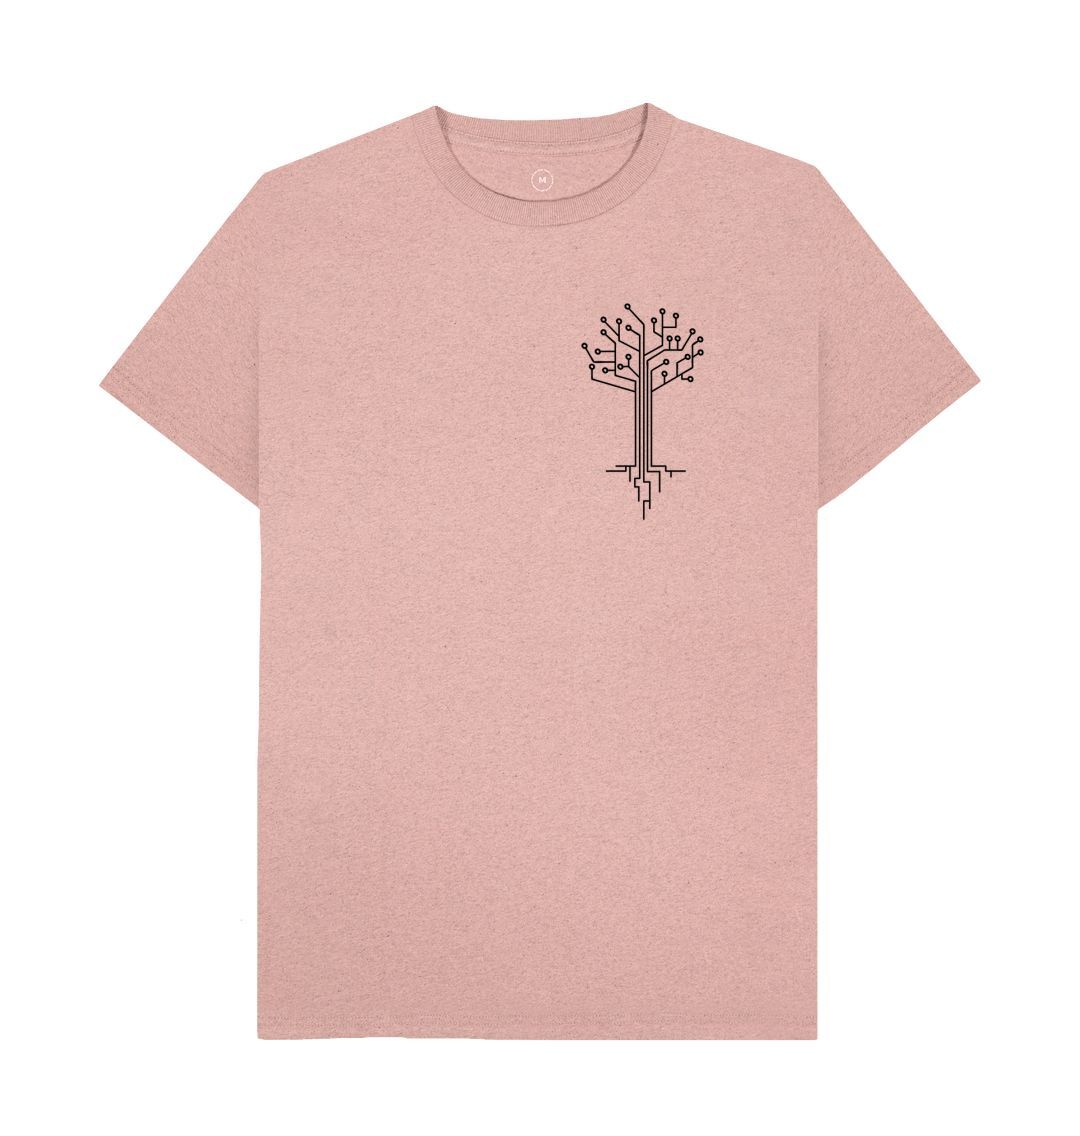 Tan Do Nature Sentient Beauty Fashions Recycled Printed T-Shirt